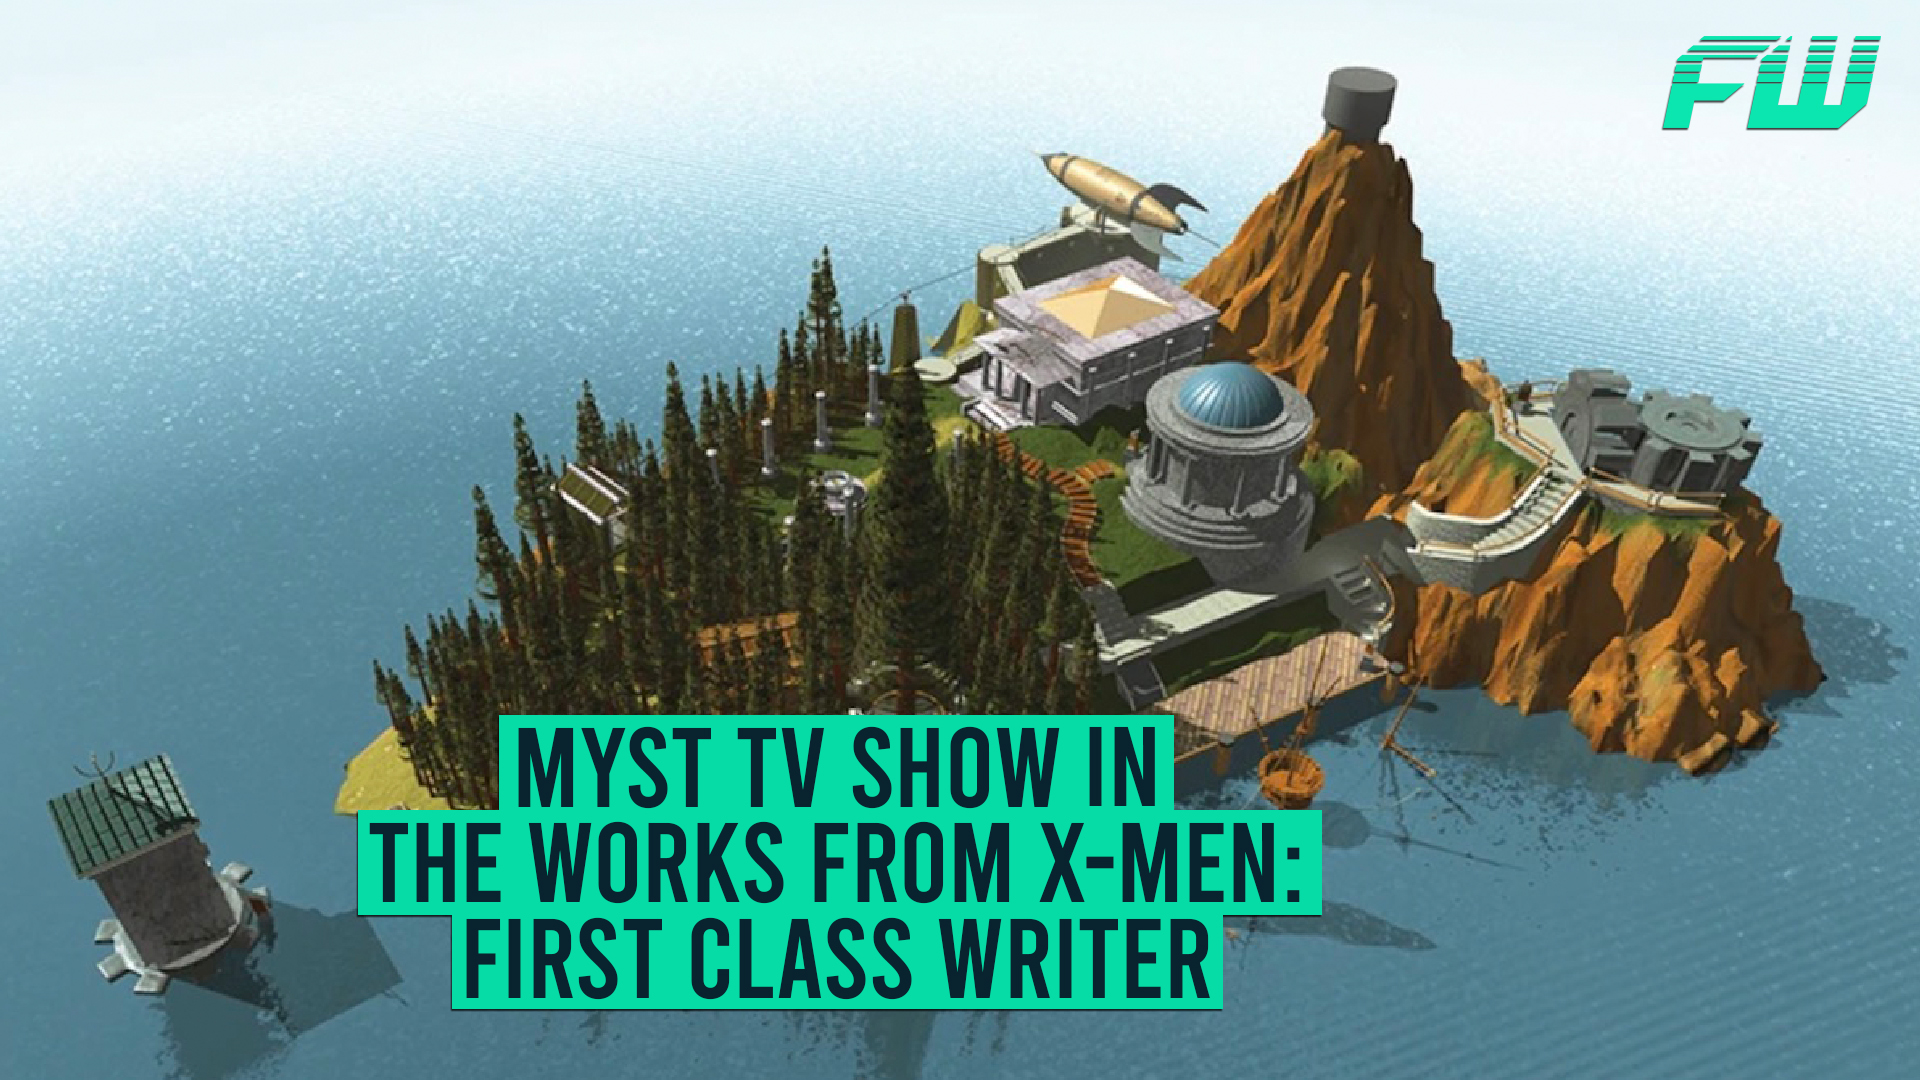 Myst TV Show in the works from X-Men First Class Writer